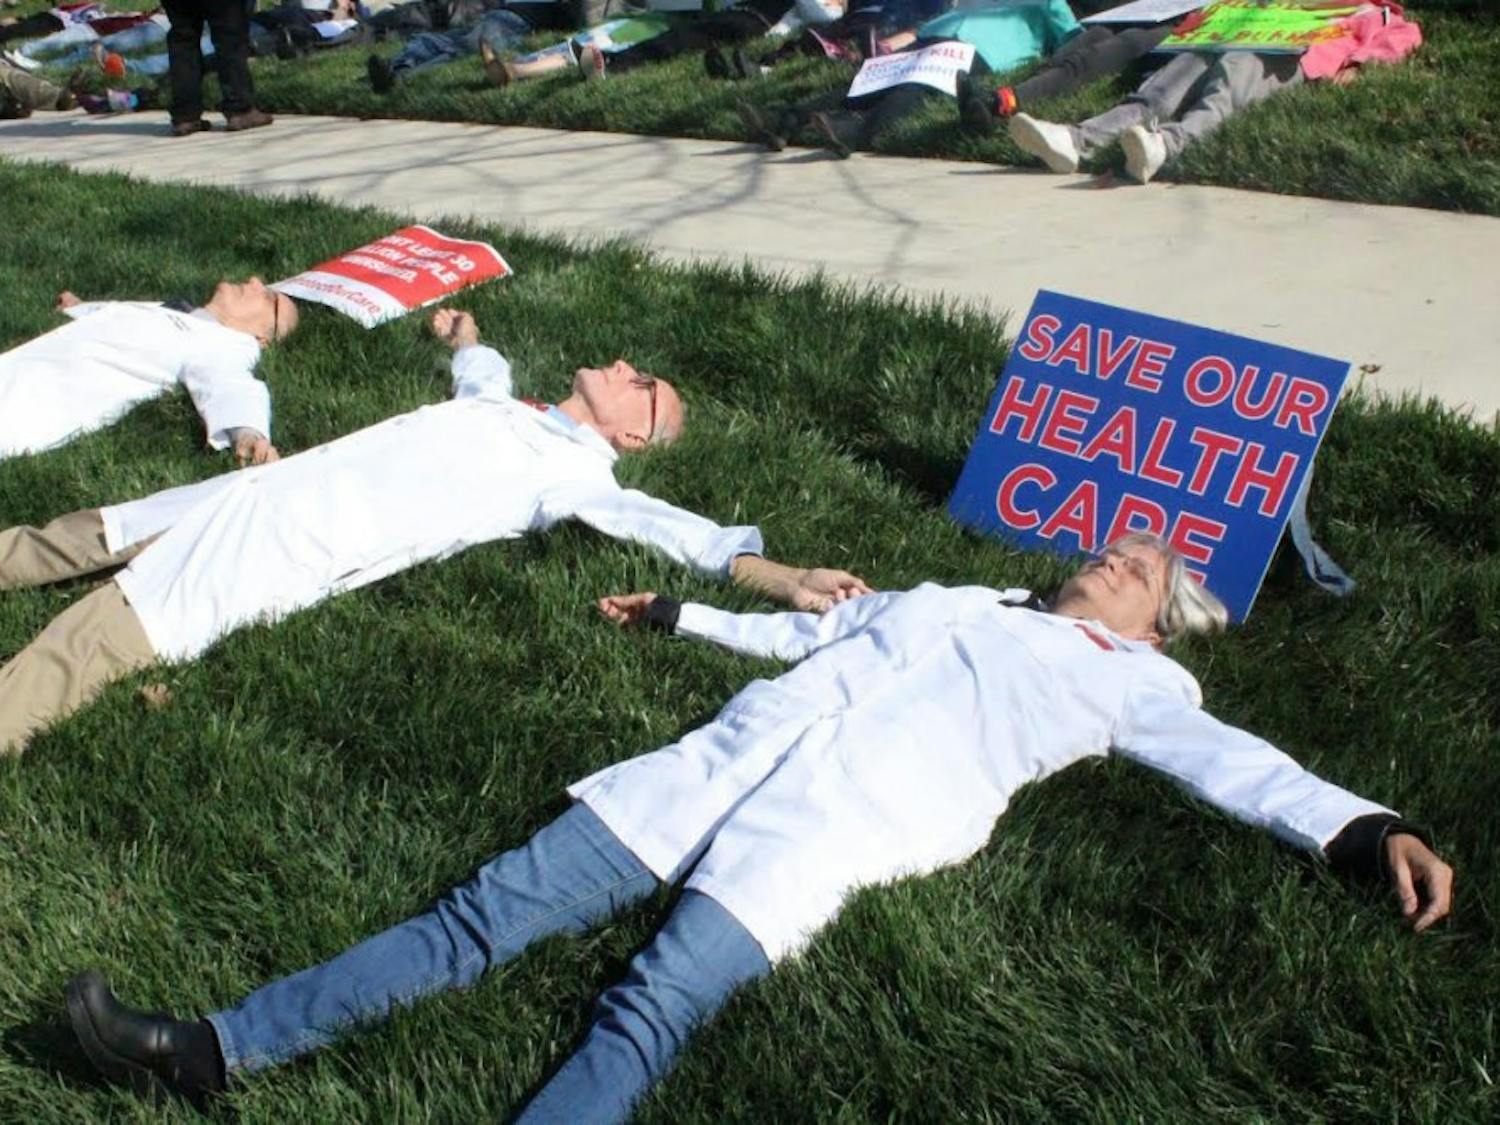 Participants spread out in the grass during Friday’s die-in in Durham in reaction to the possible changes in health care policies.